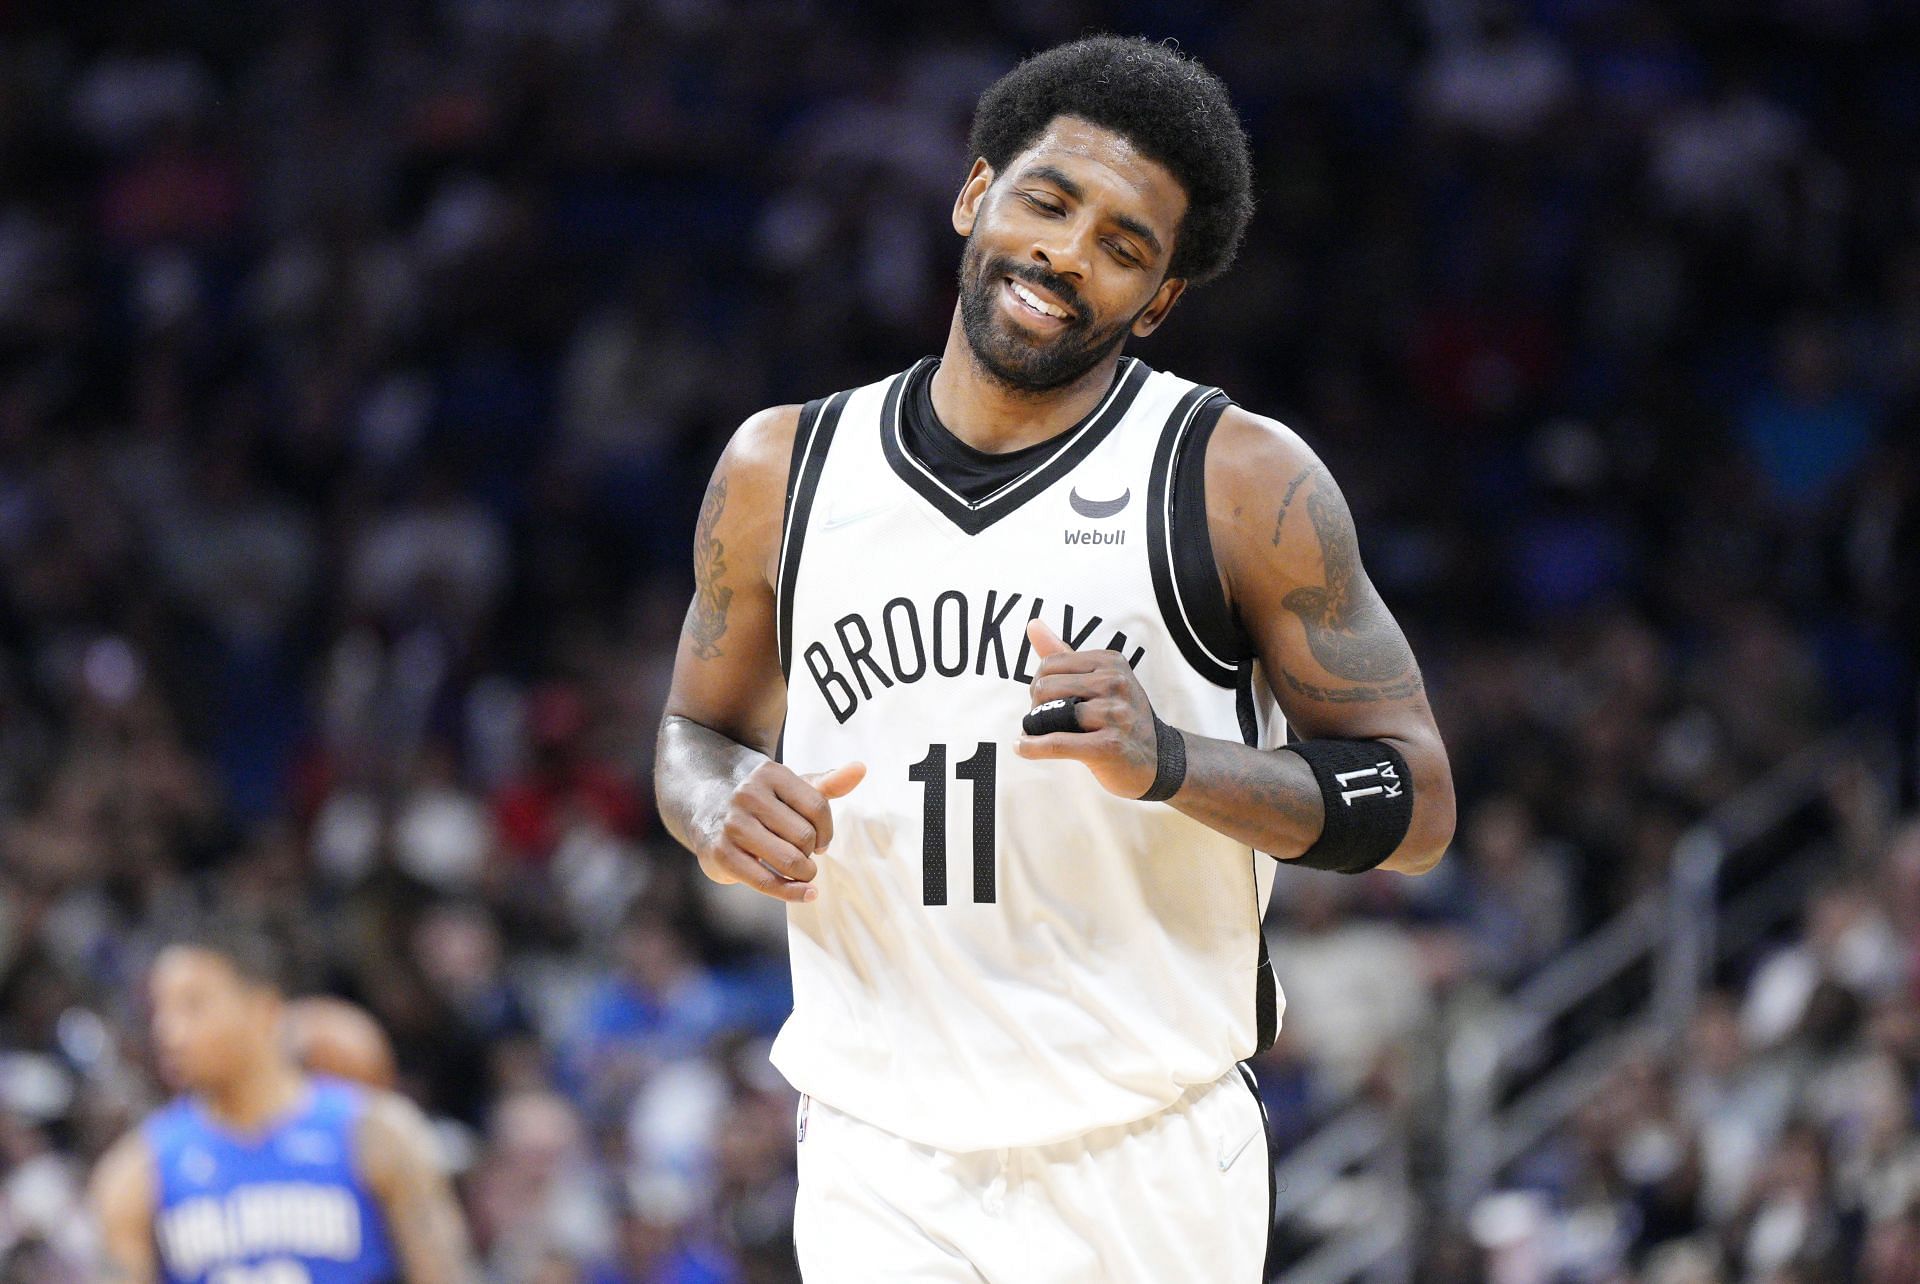 Kyrie Irving of the Brooklyn Nets reacts after scoring against the Orlando Magic